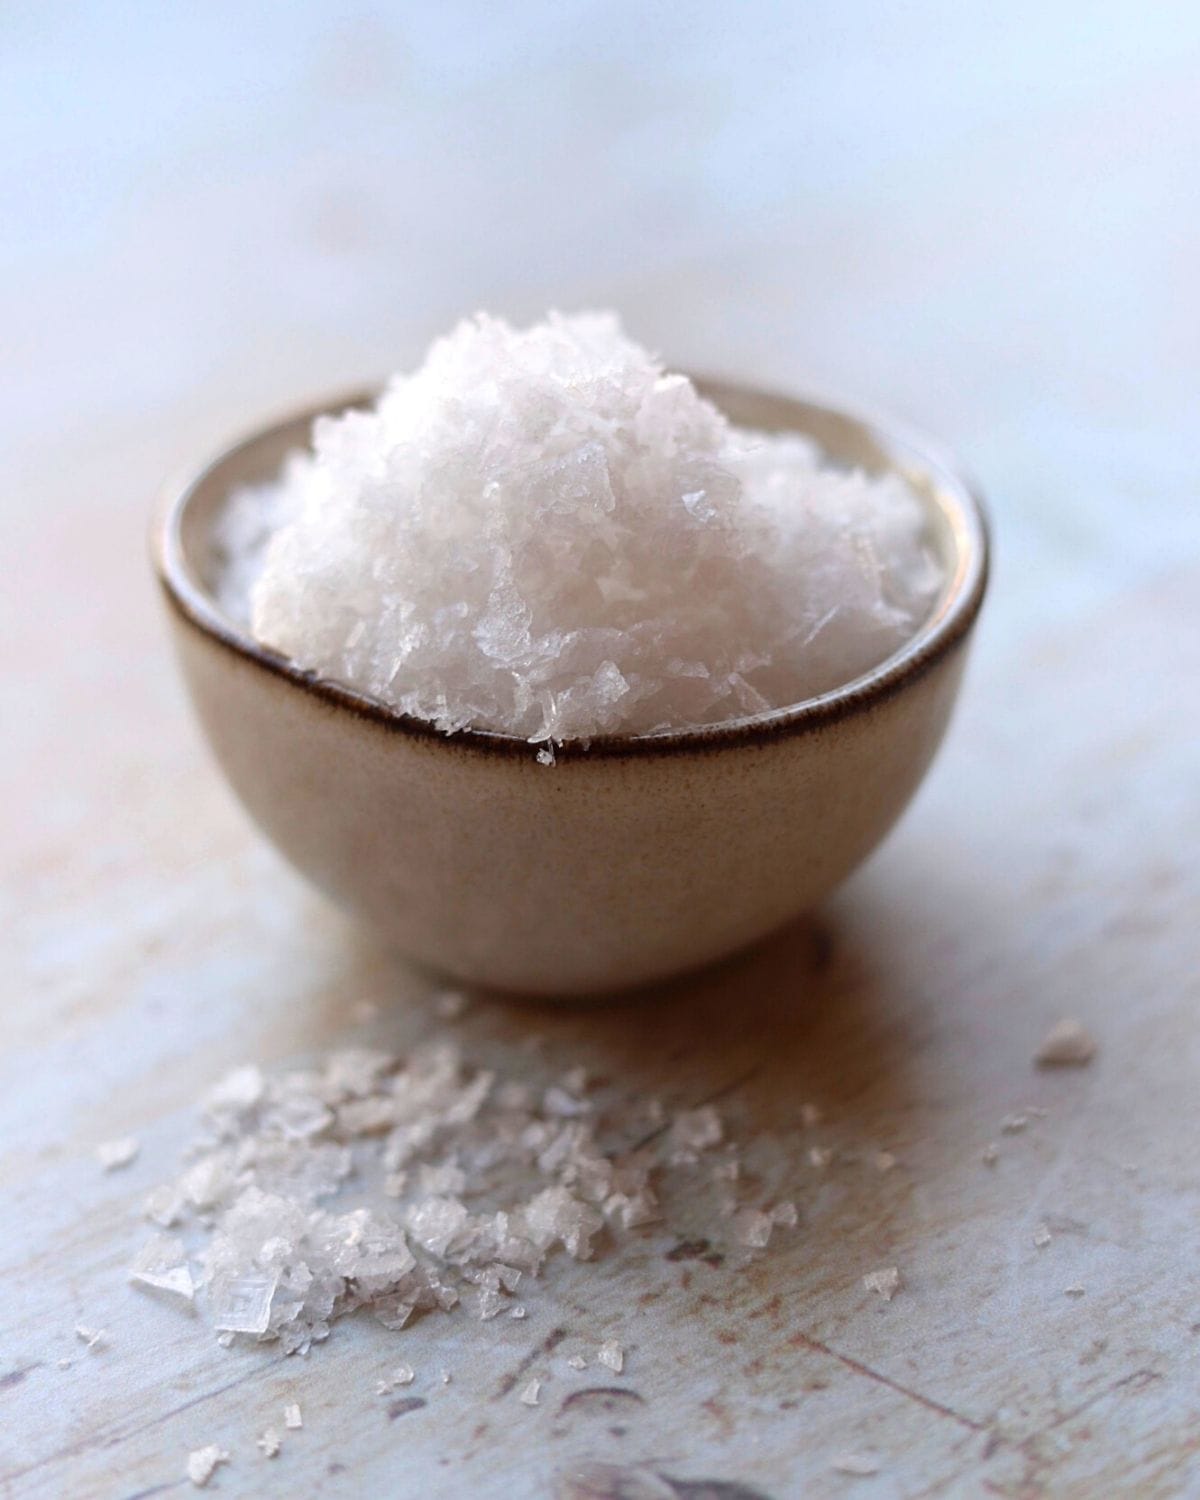 Types Of Edible Salt - End of the Fork